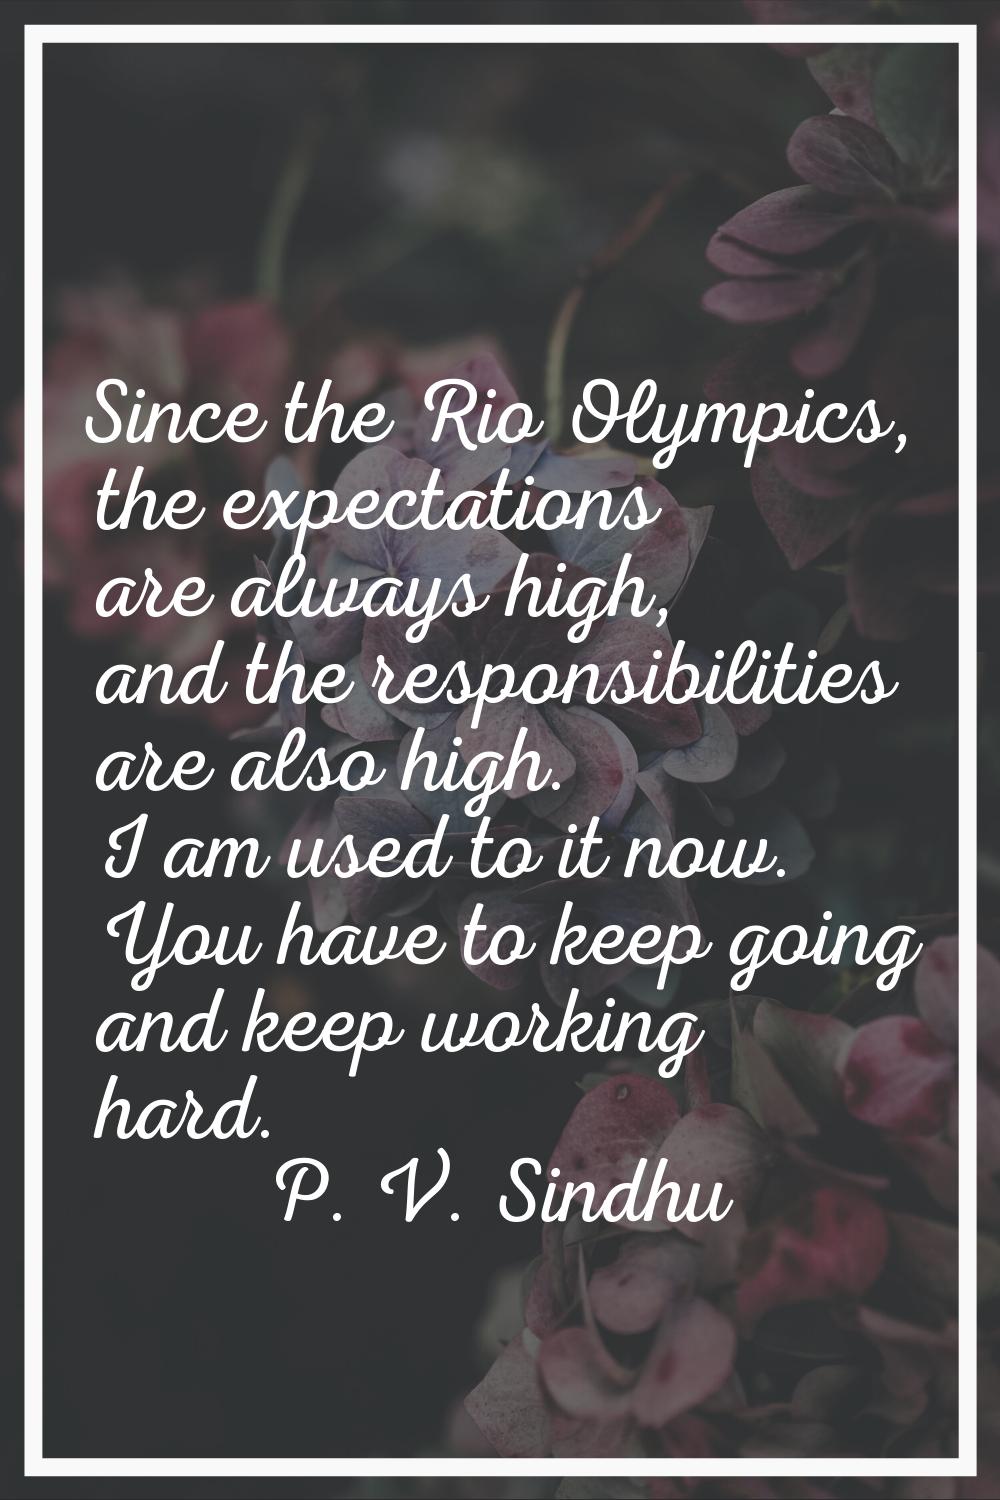 Since the Rio Olympics, the expectations are always high, and the responsibilities are also high. I